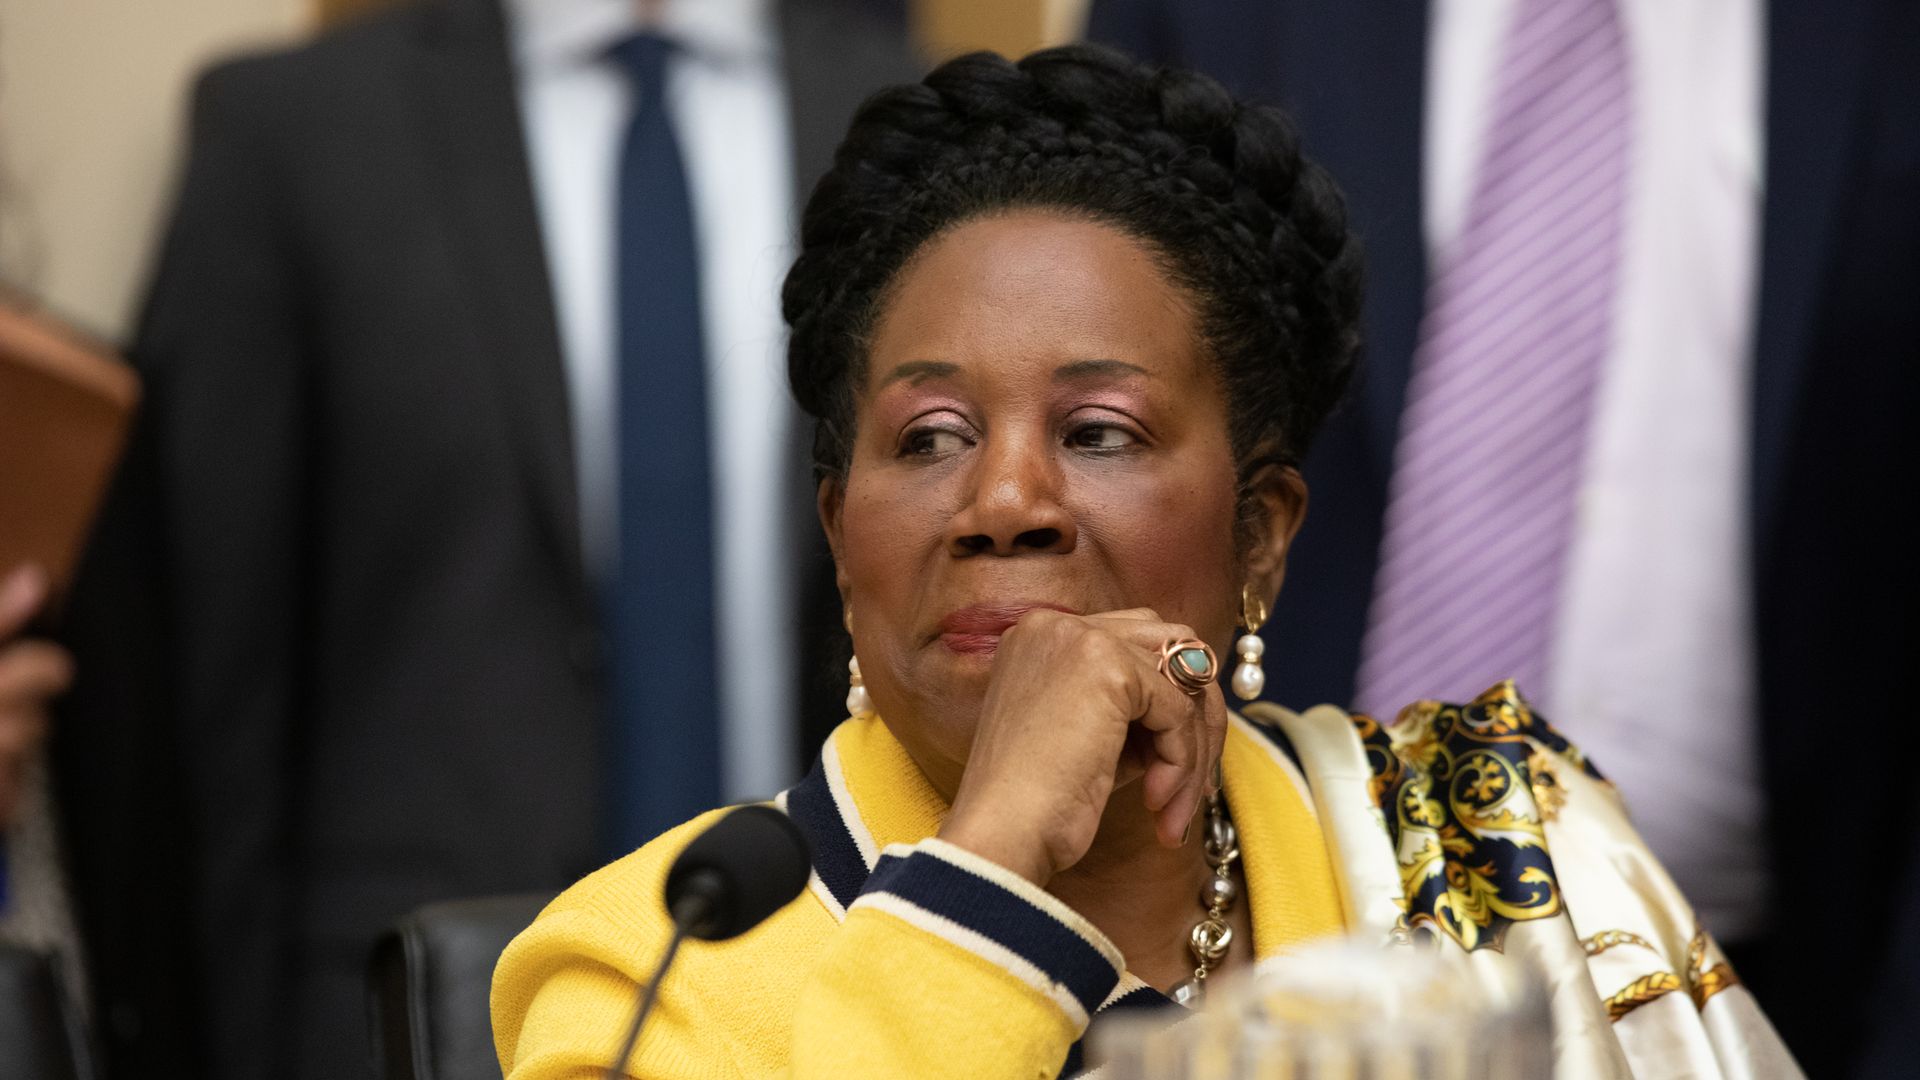 Rep. Sheila Jackson Lee listens during a hearing about reparations for the descendants of enslaved people for a House Judiciary subcommittee in Washington, D.C.